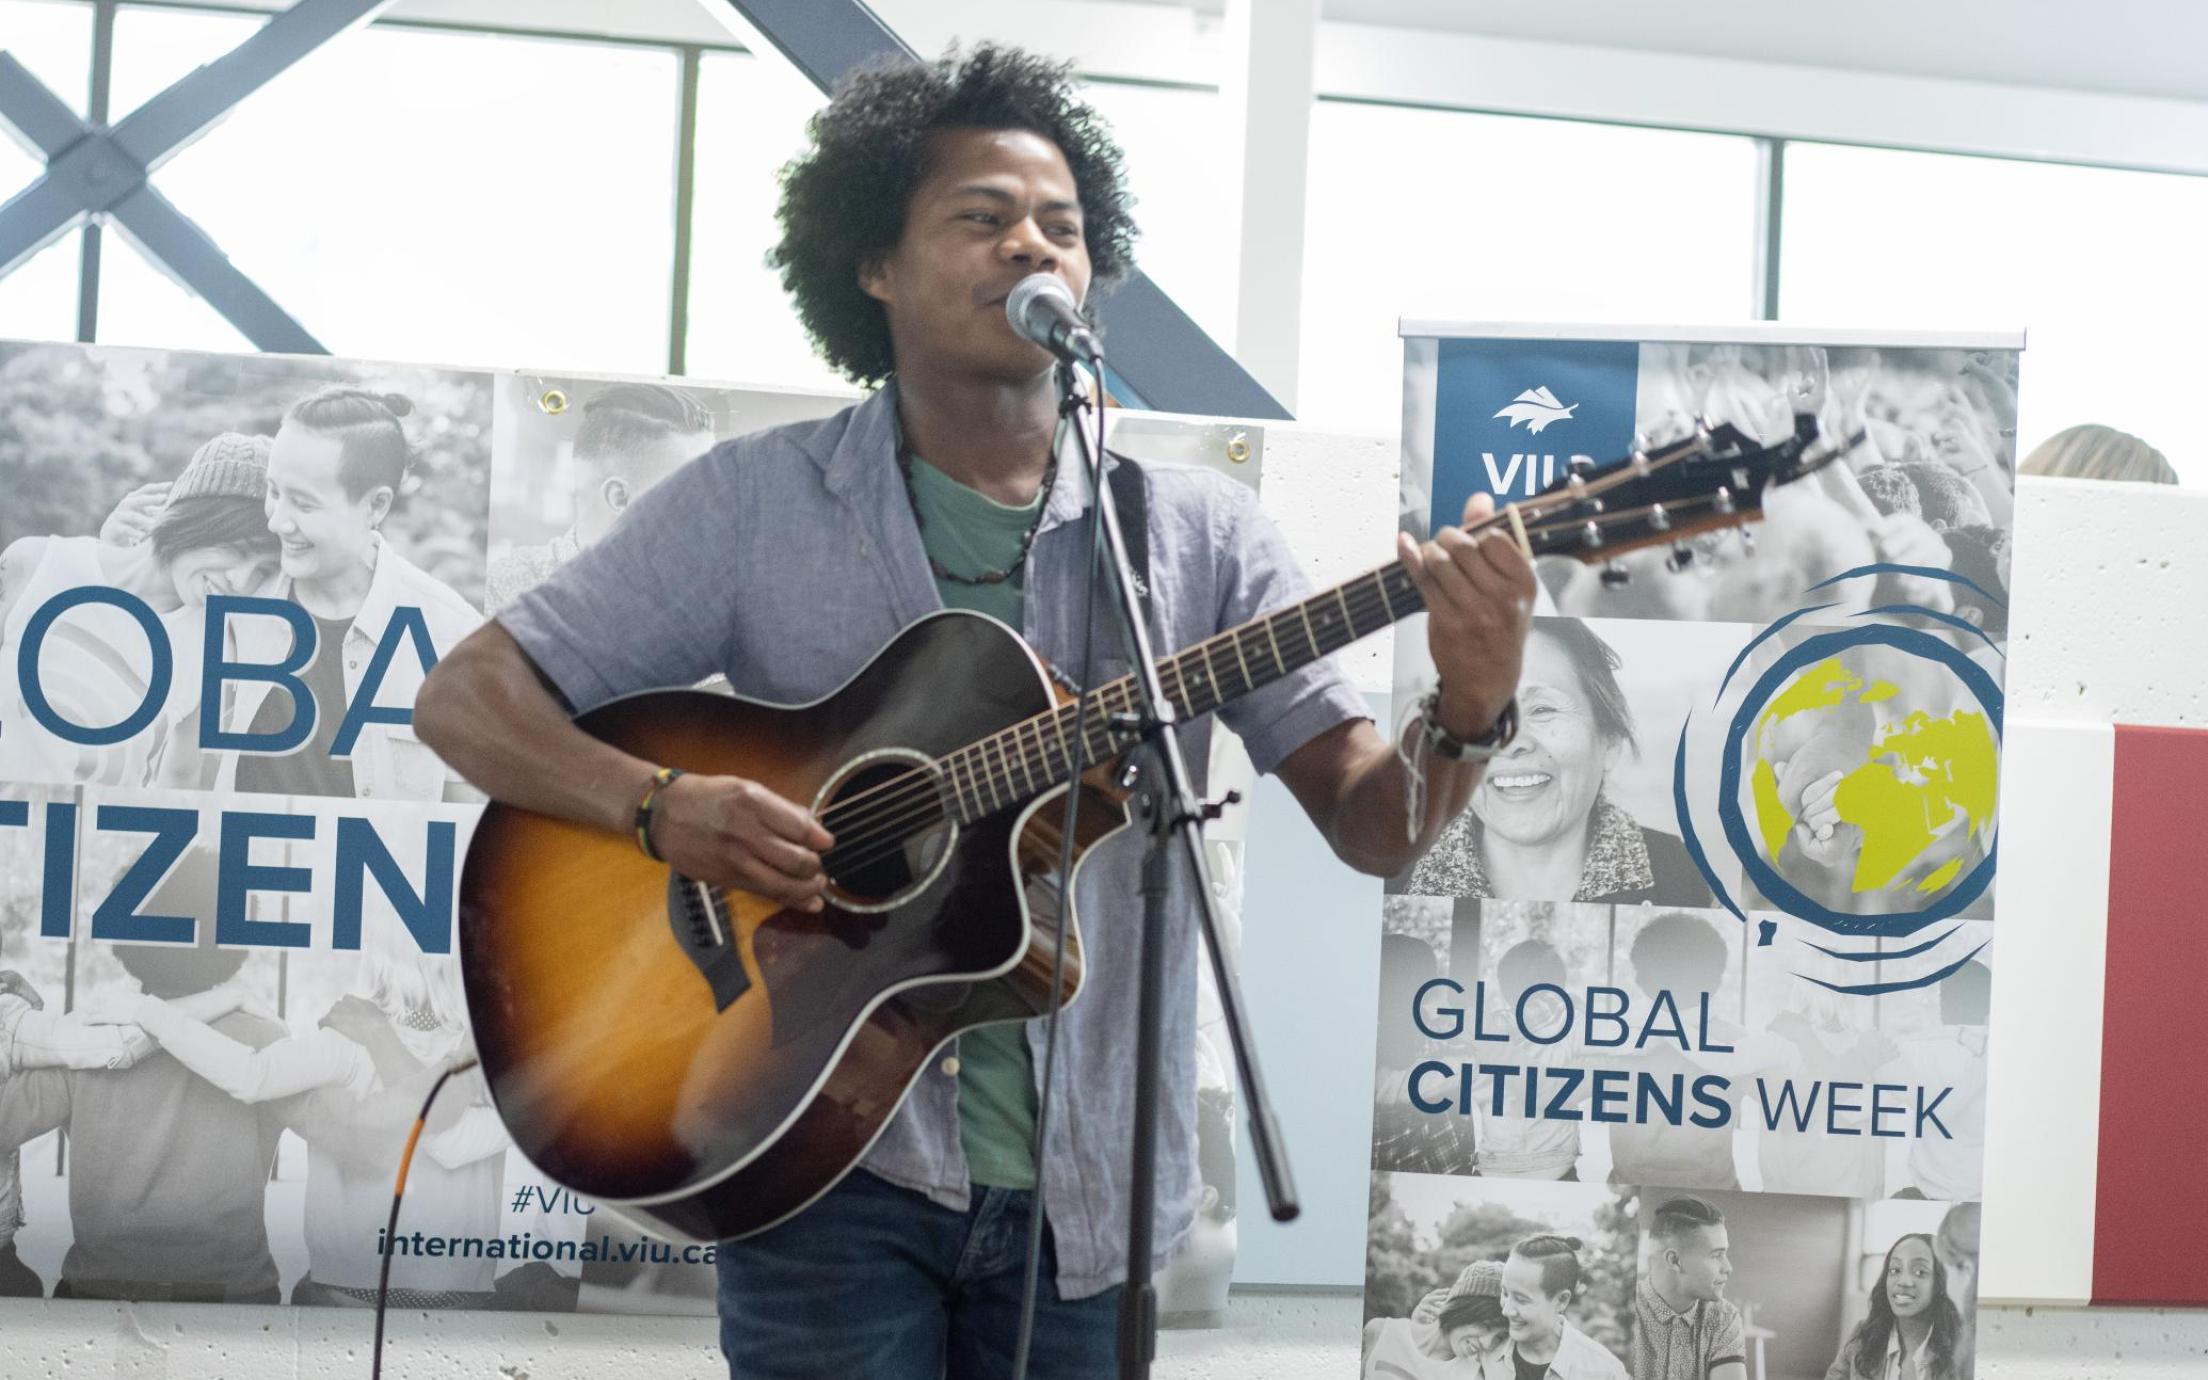 Student sings and plays guitar with Global Citizens Week banners behind him